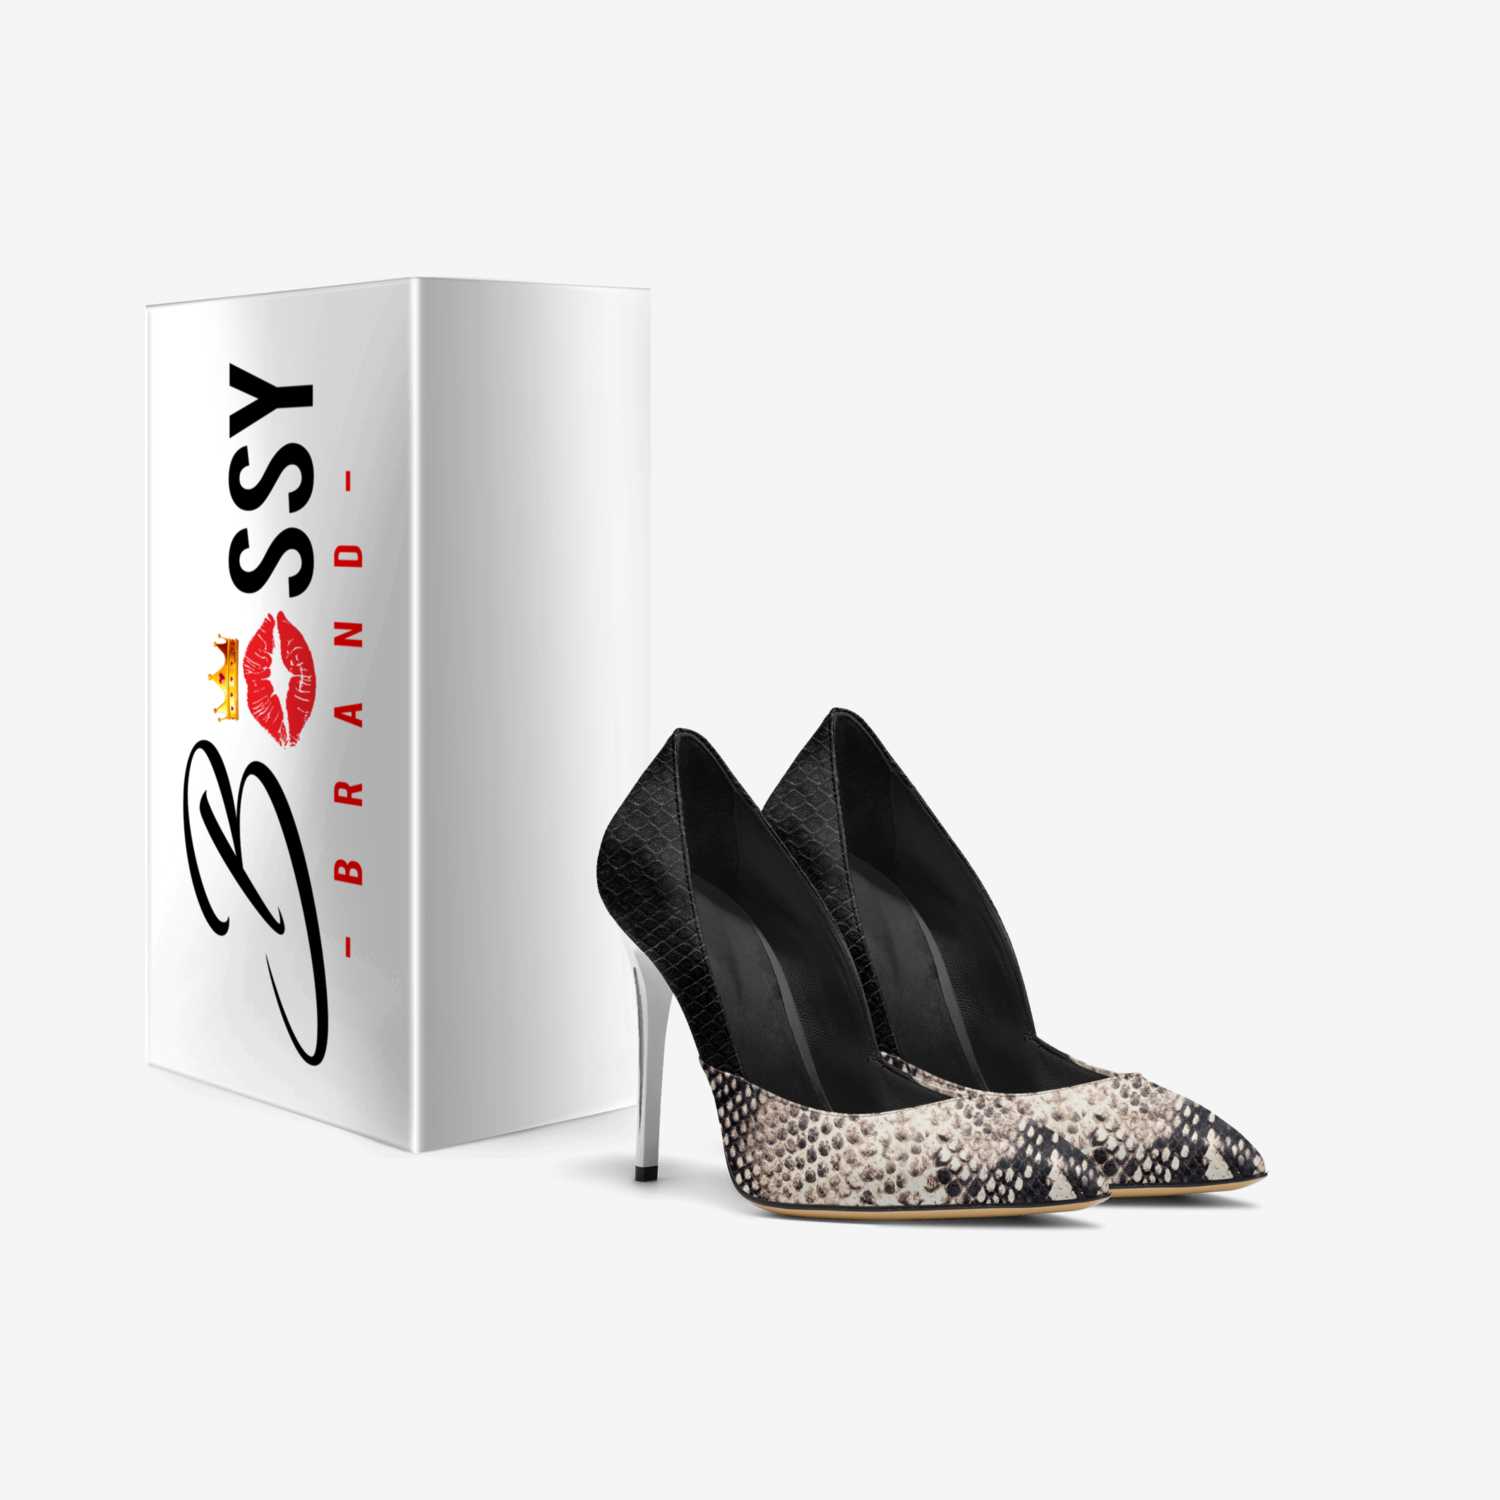 B.O.S.S.Y Brand custom made in Italy shoes by Mika Campbell | Box view